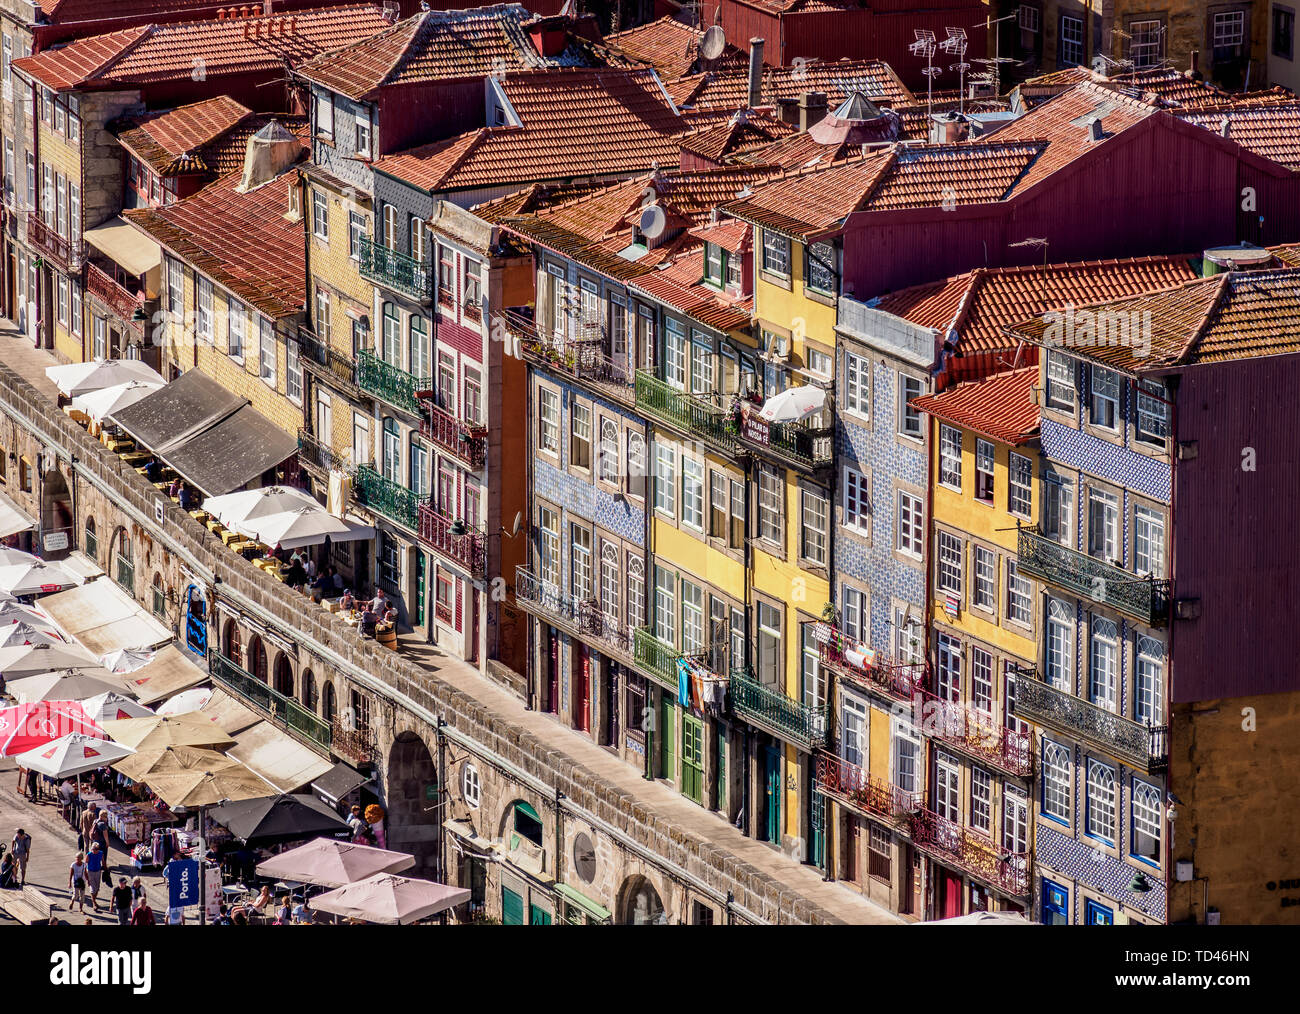 Colourful houses of Ribeira, elevated view, Porto, Portugal, Europe Stock Photo